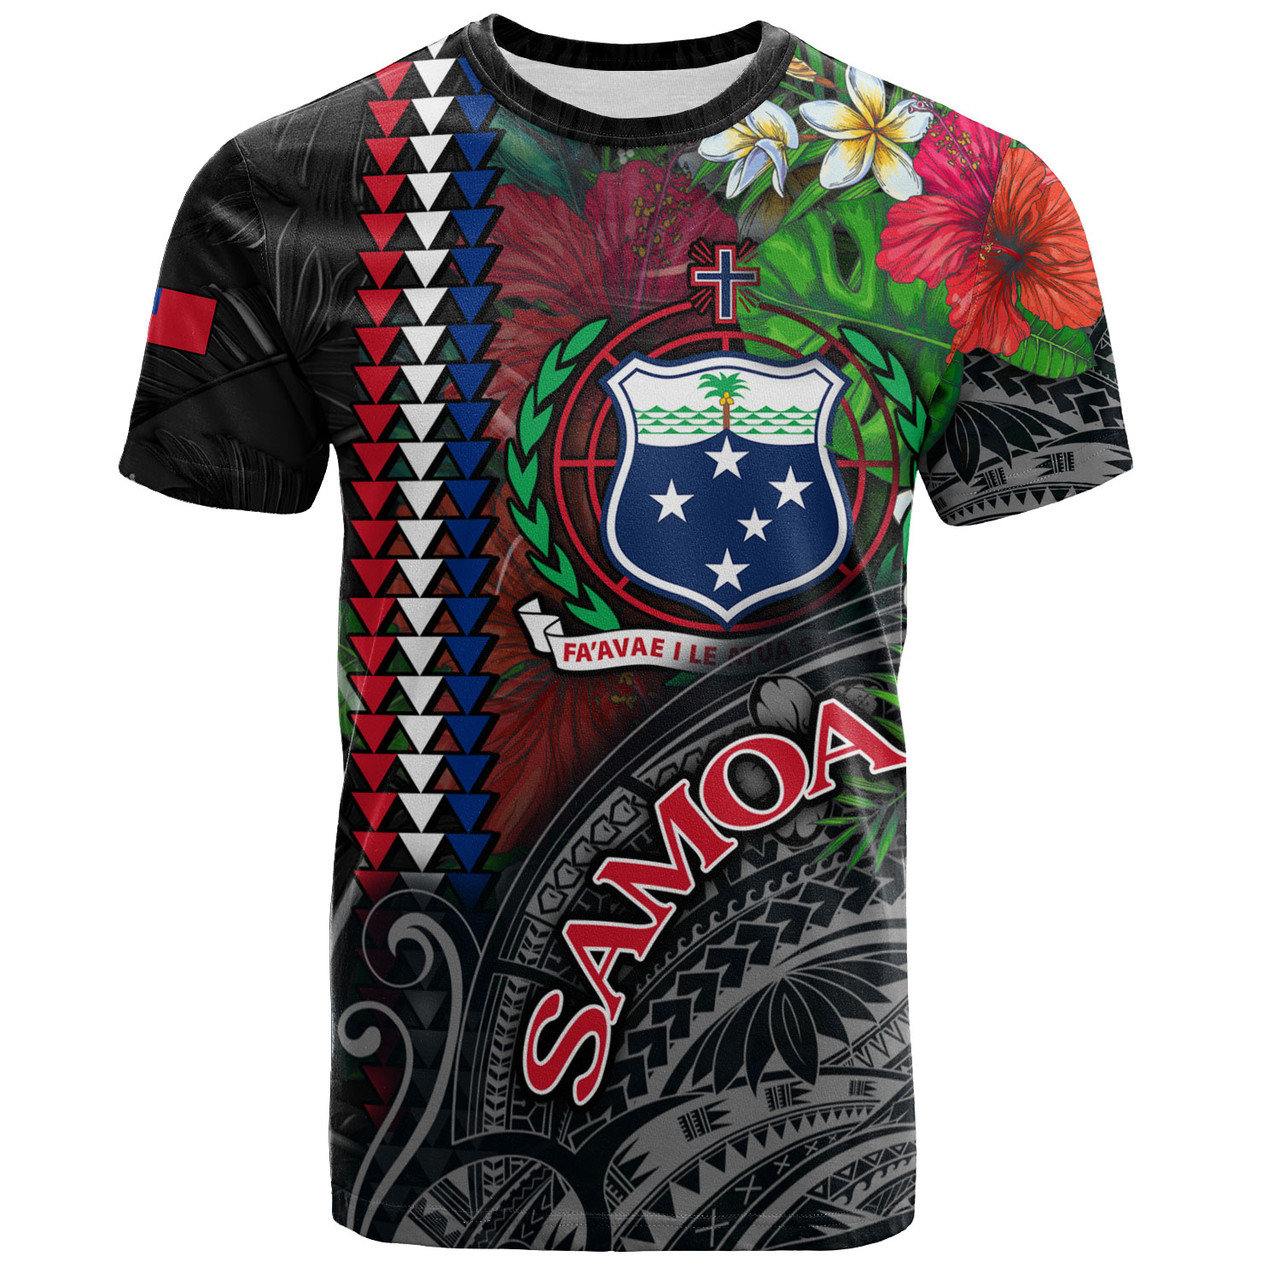 Samoa Custom Personalised T-Shirt Samoa Seal Hibiscus And Plumeria With Palm Branches Vintage Style